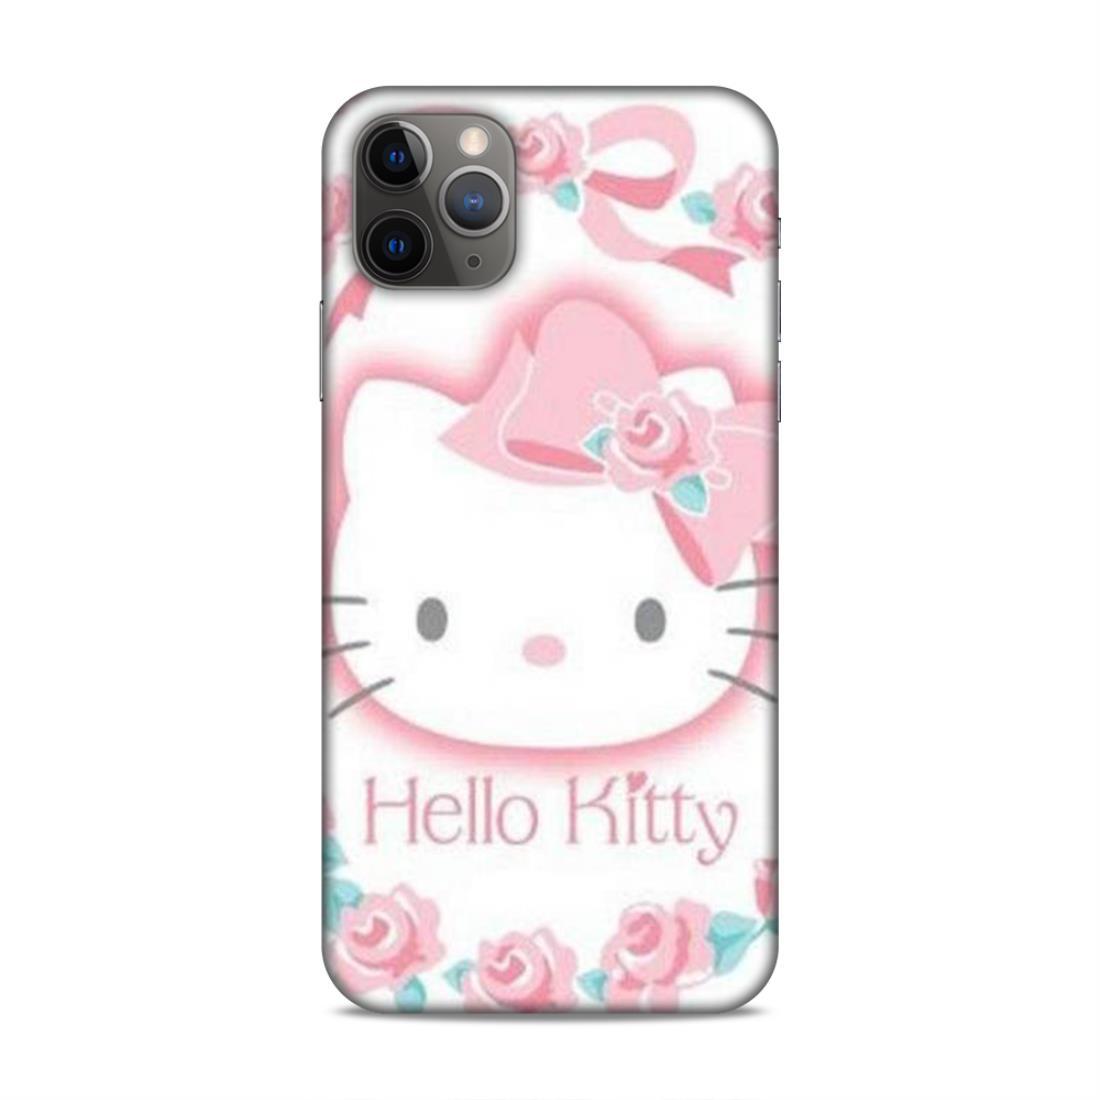 Hellow Kitty Pink iPhone 11 Pro Max Phone Cover Case